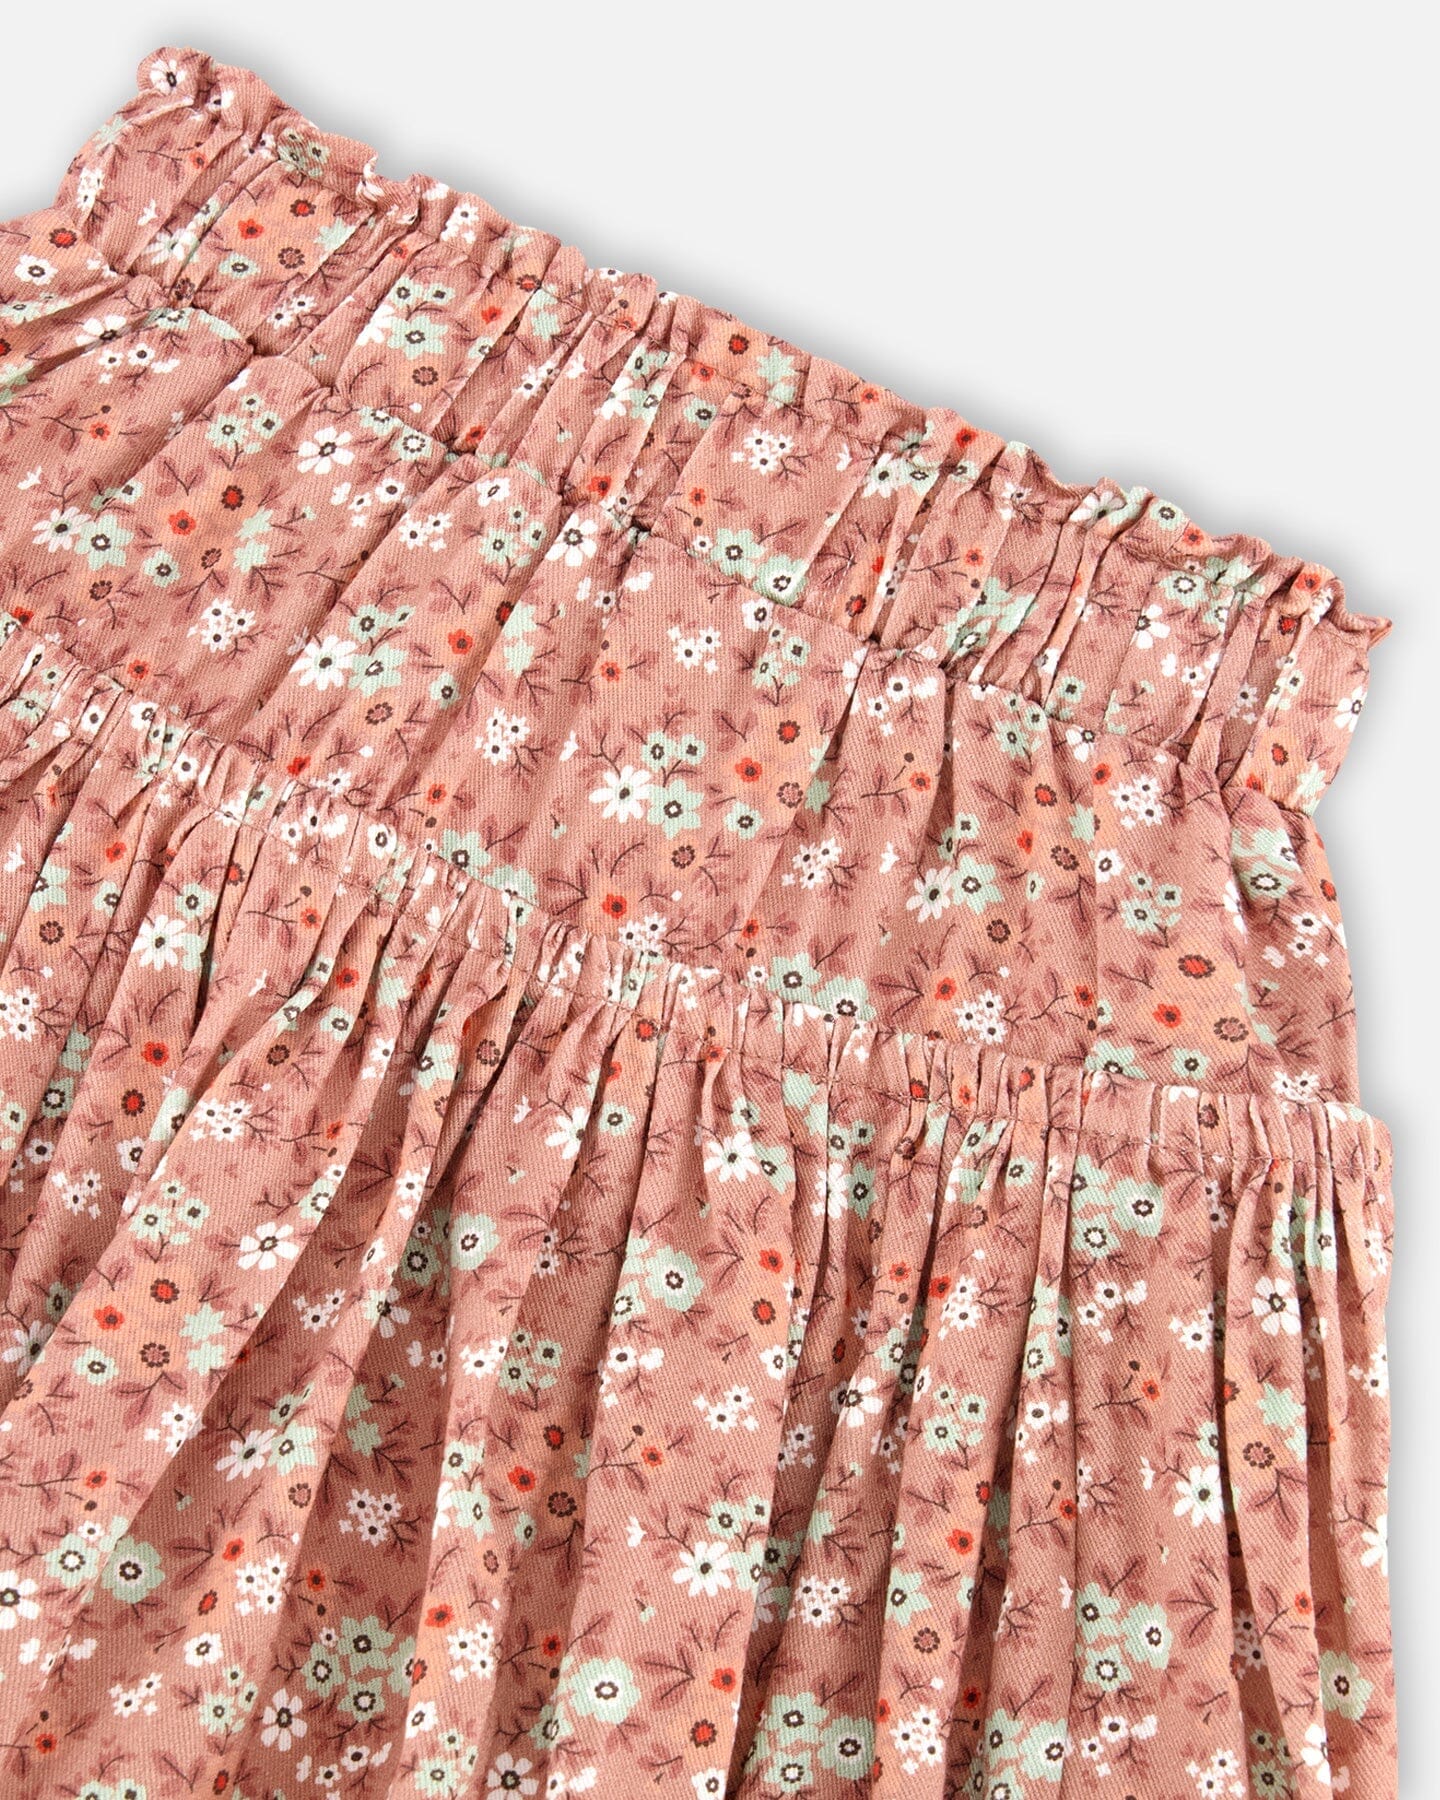 Printed Woven Skirt Dusty Mauve Floral Print - F20G81_031